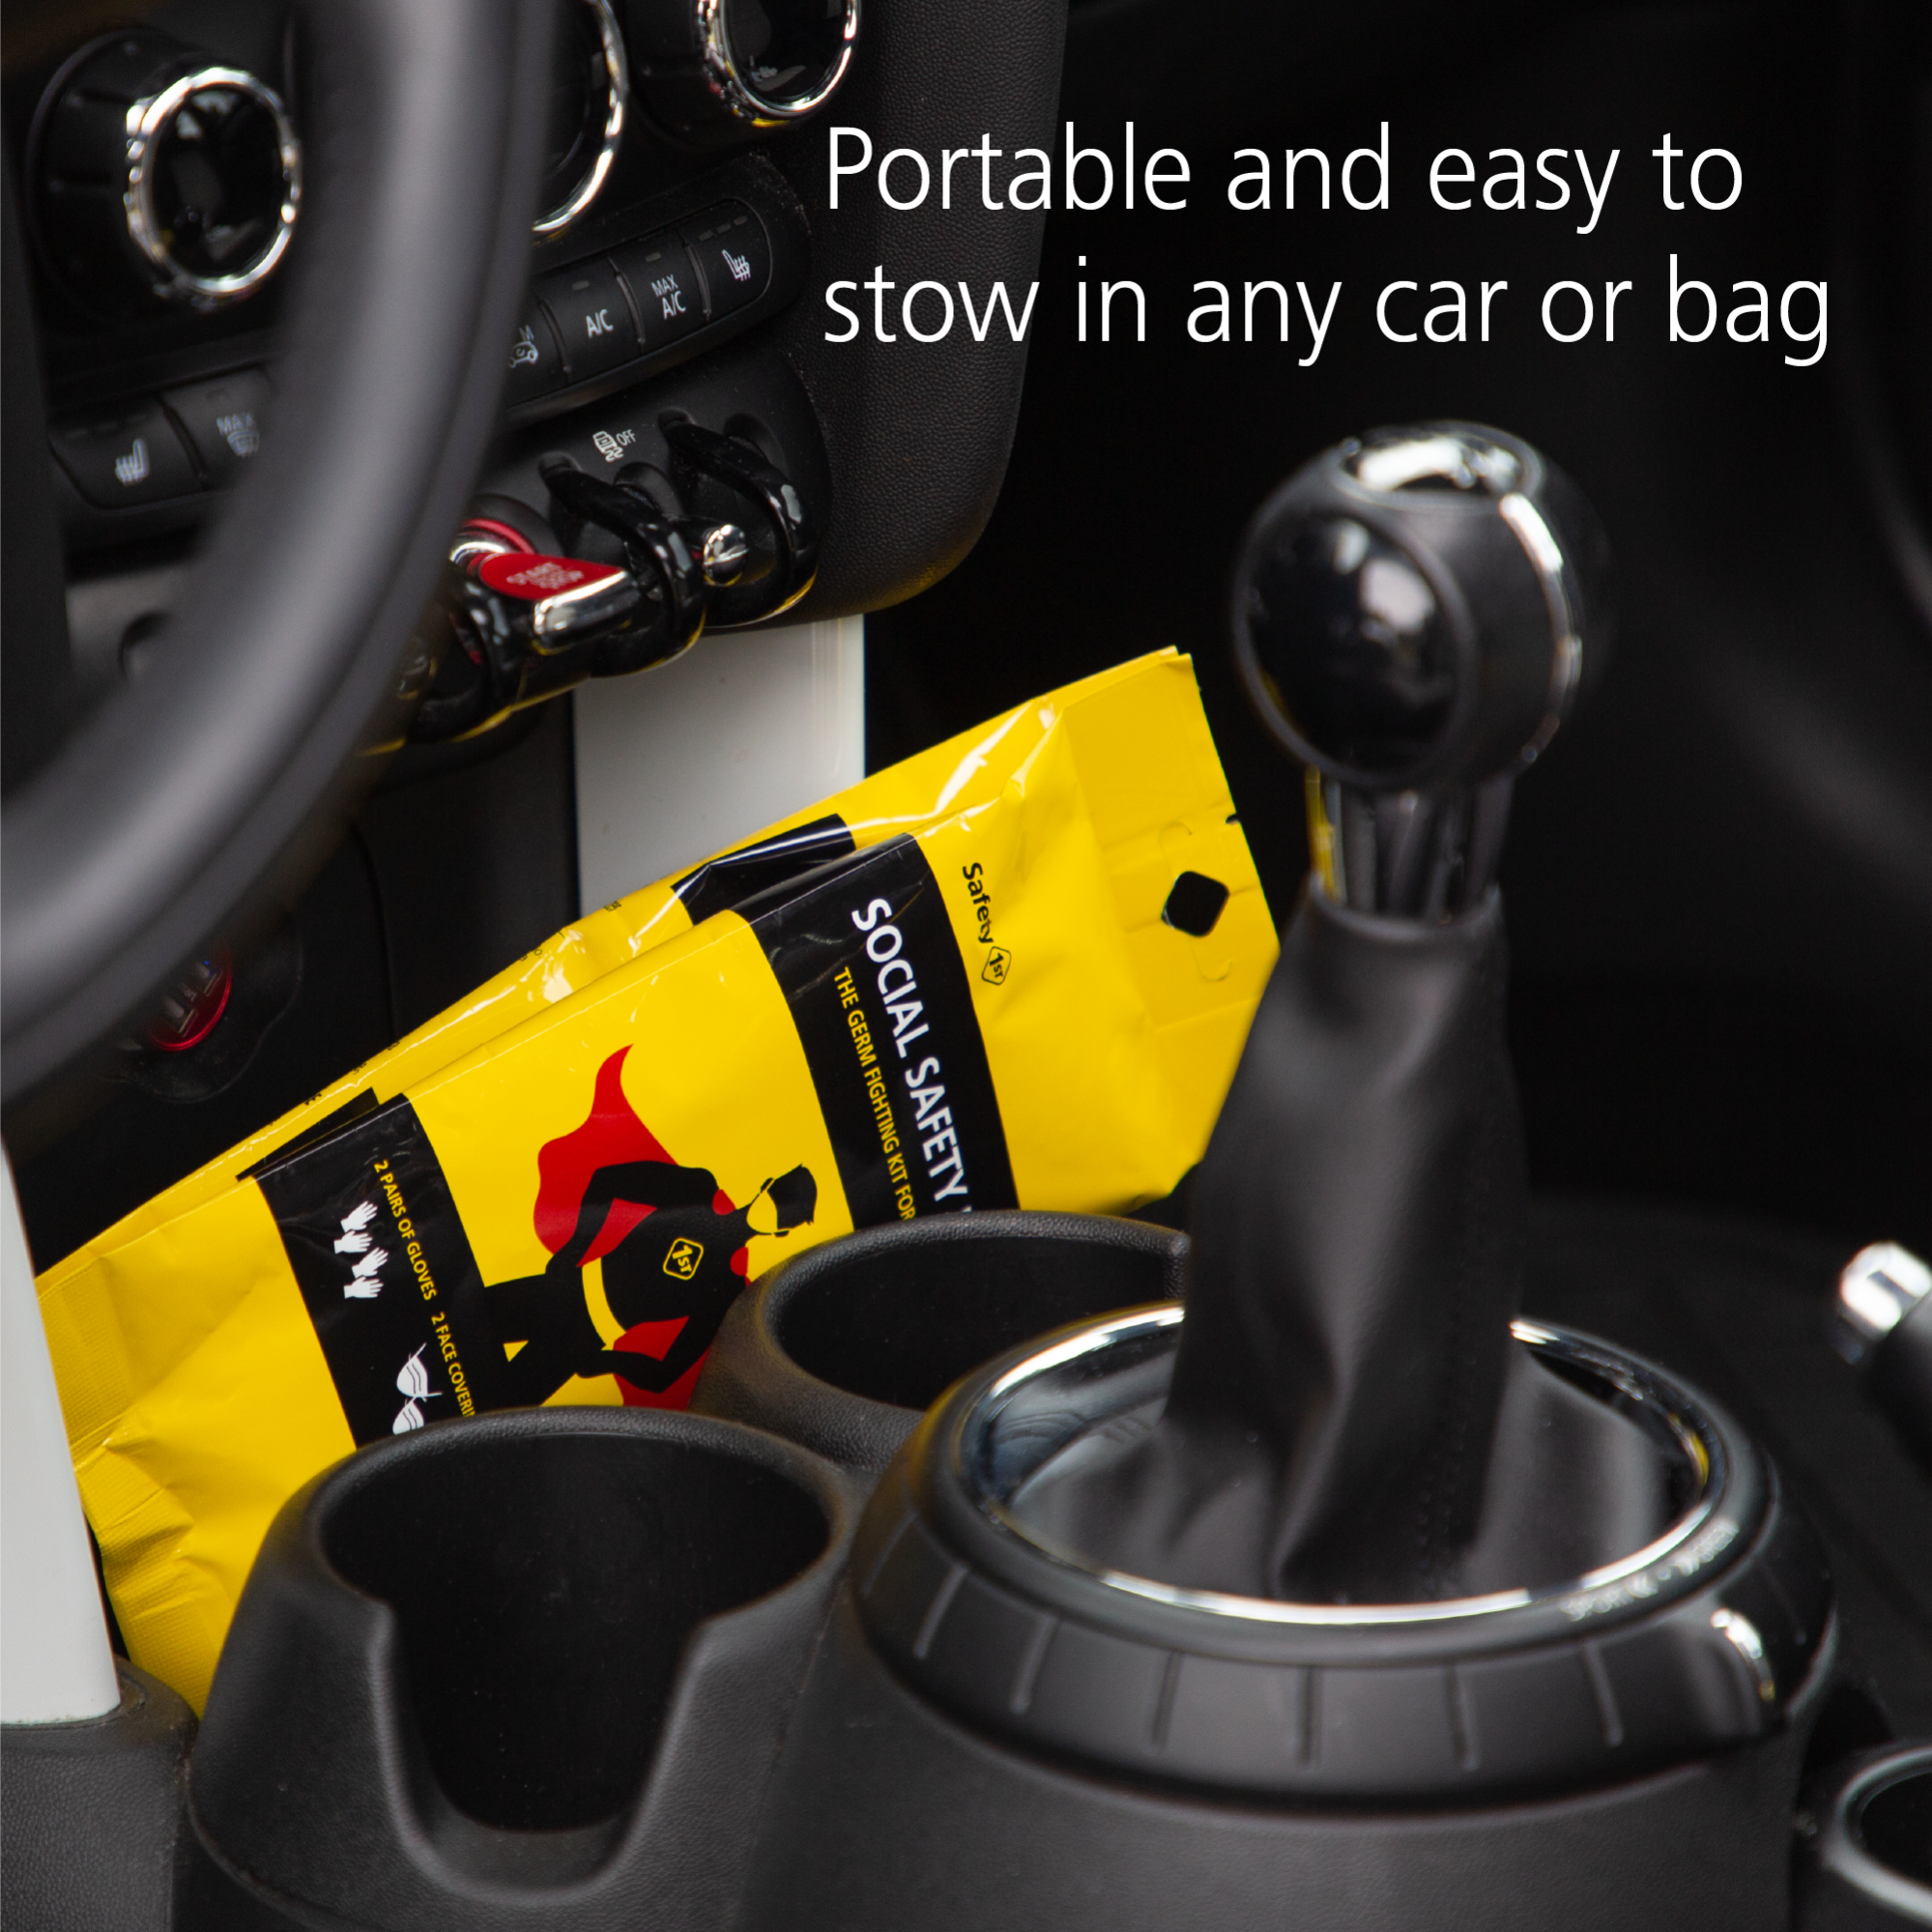 Portable and easy to stow in any car or bag